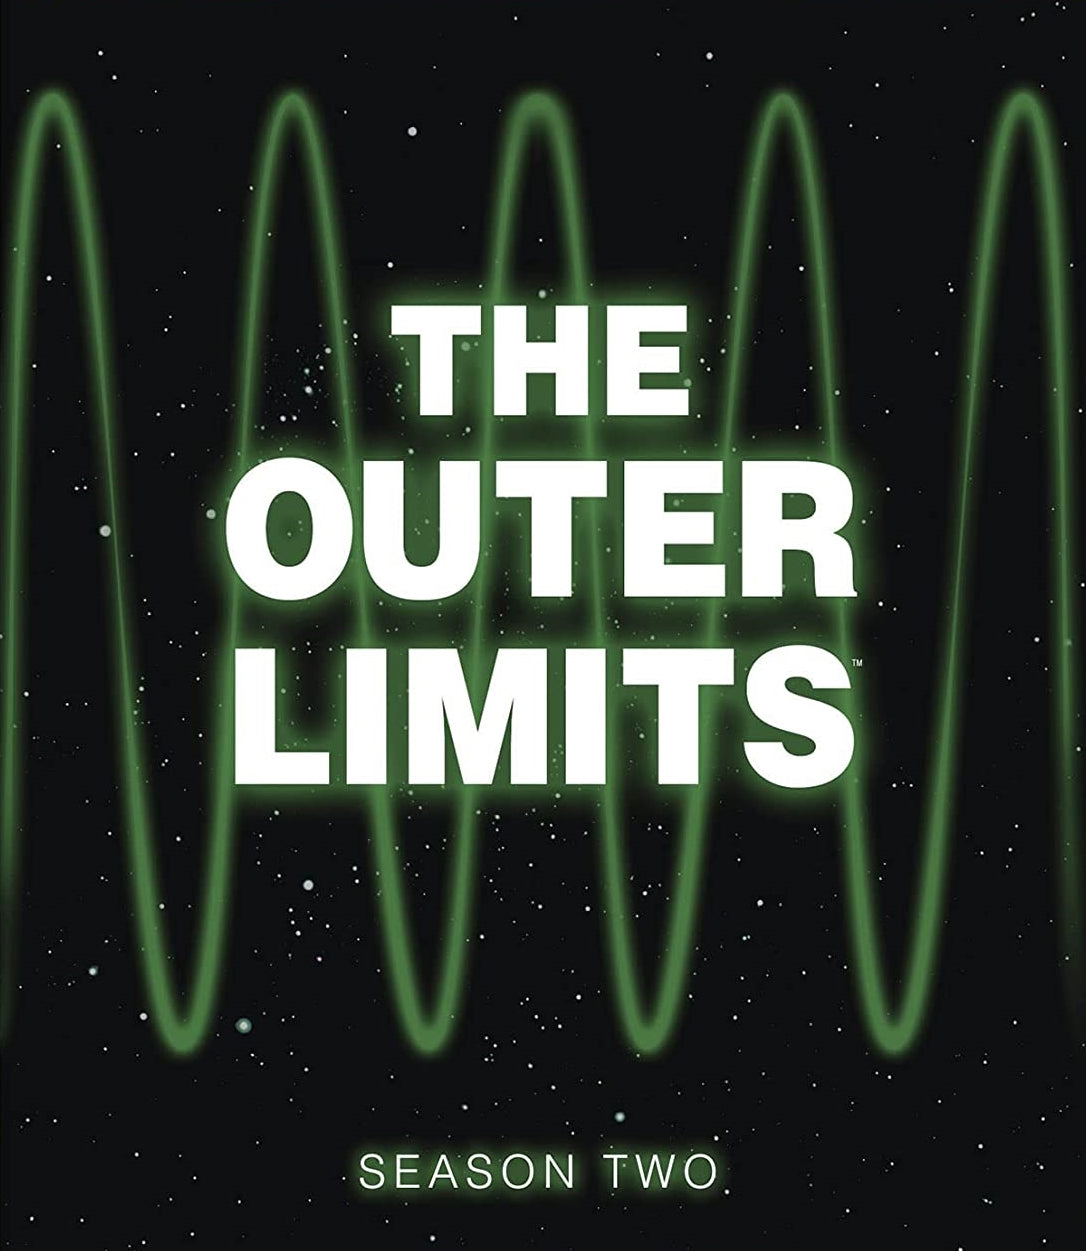 THE OUTER LIMITS SEASON TWO BLU-RAY